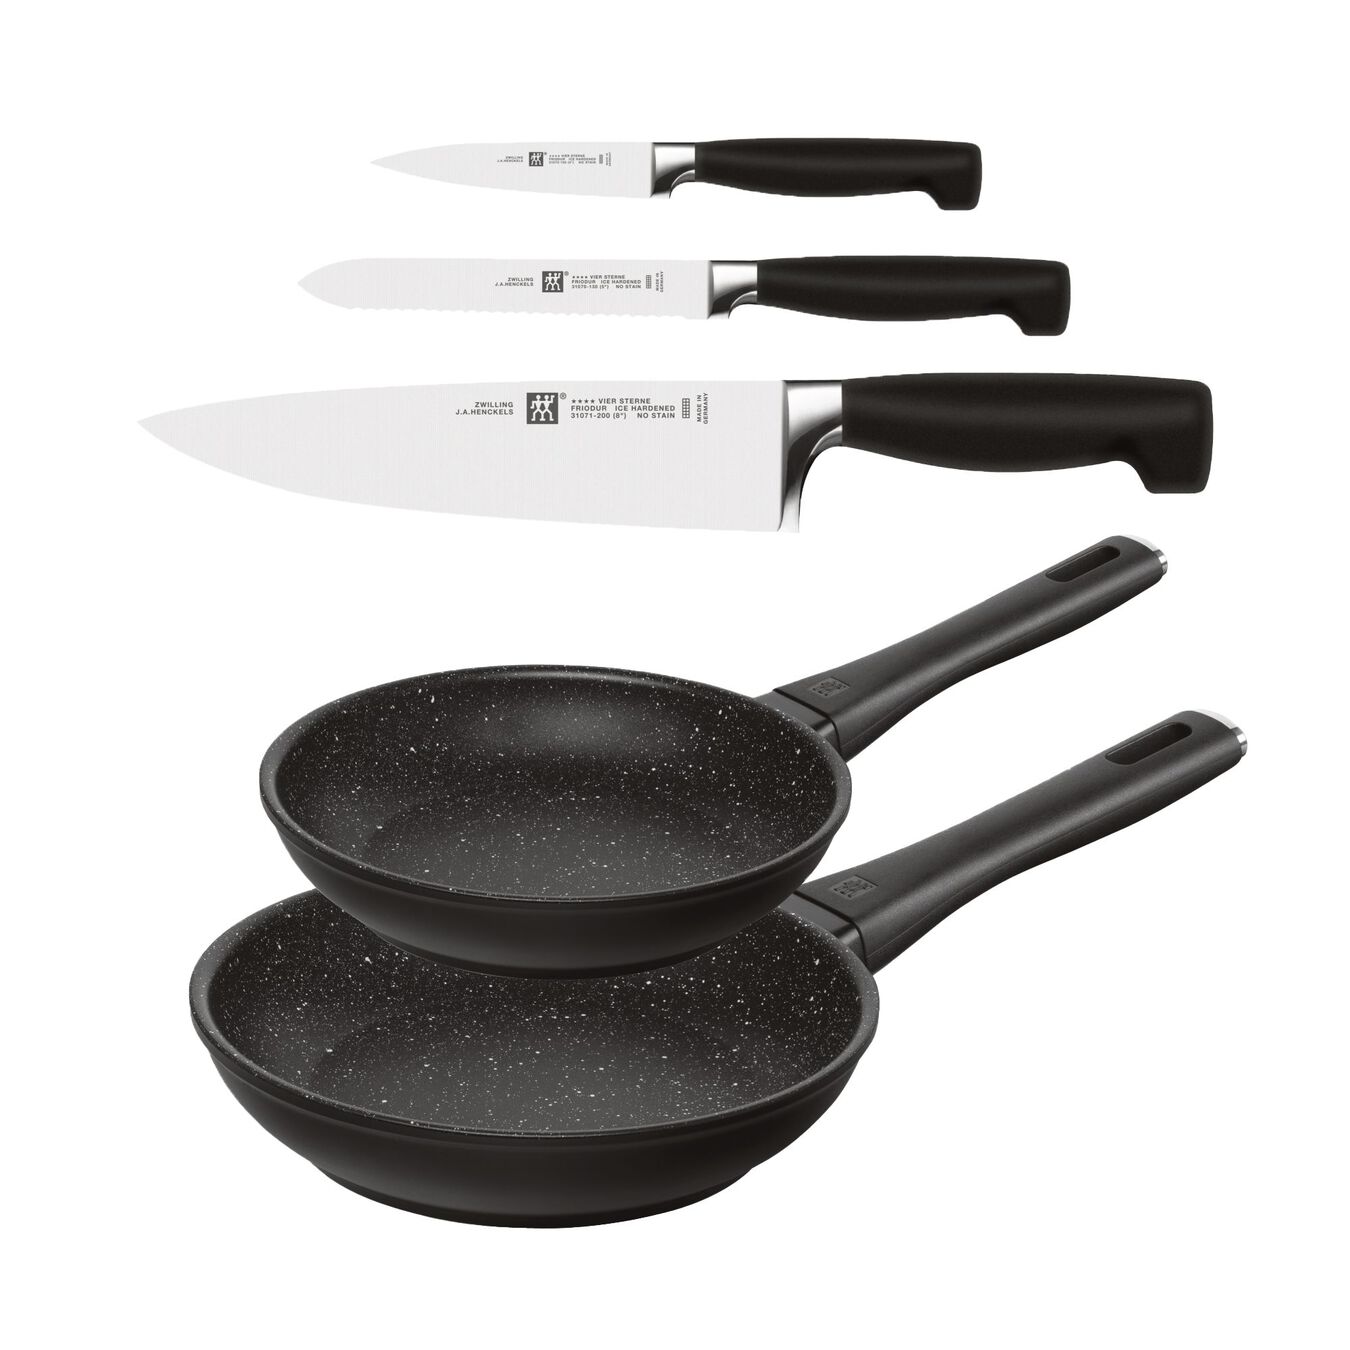 Henckels 3pc Four Star Knife Set & 2pc Marquina Frypan Set